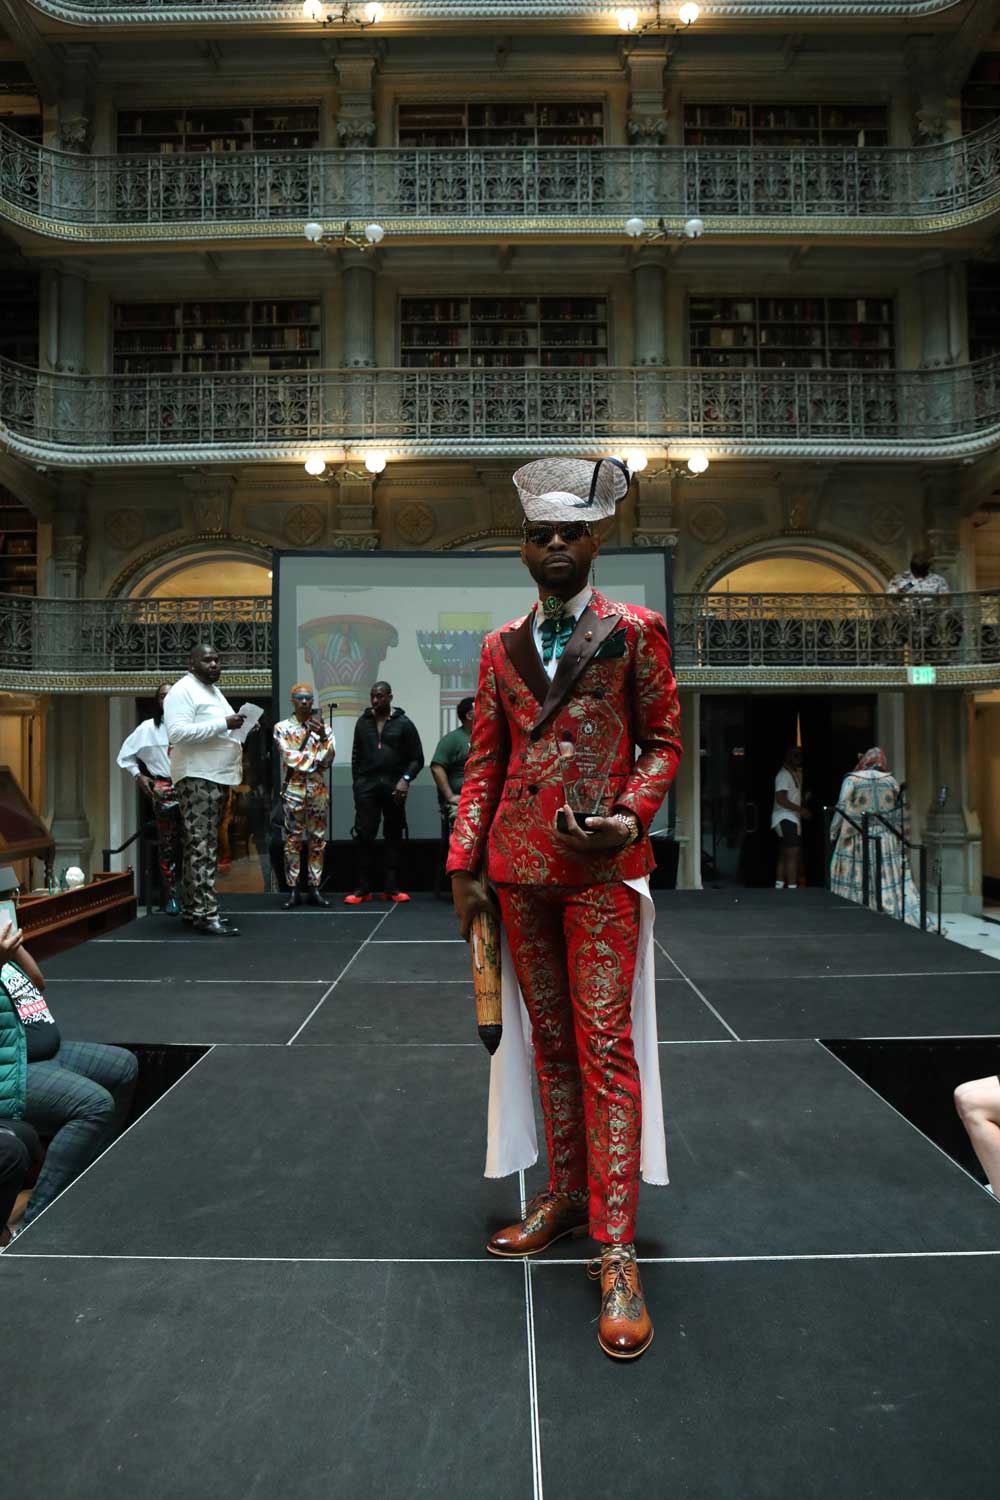 A performer in a red costume on the stage at the George Peabody Library